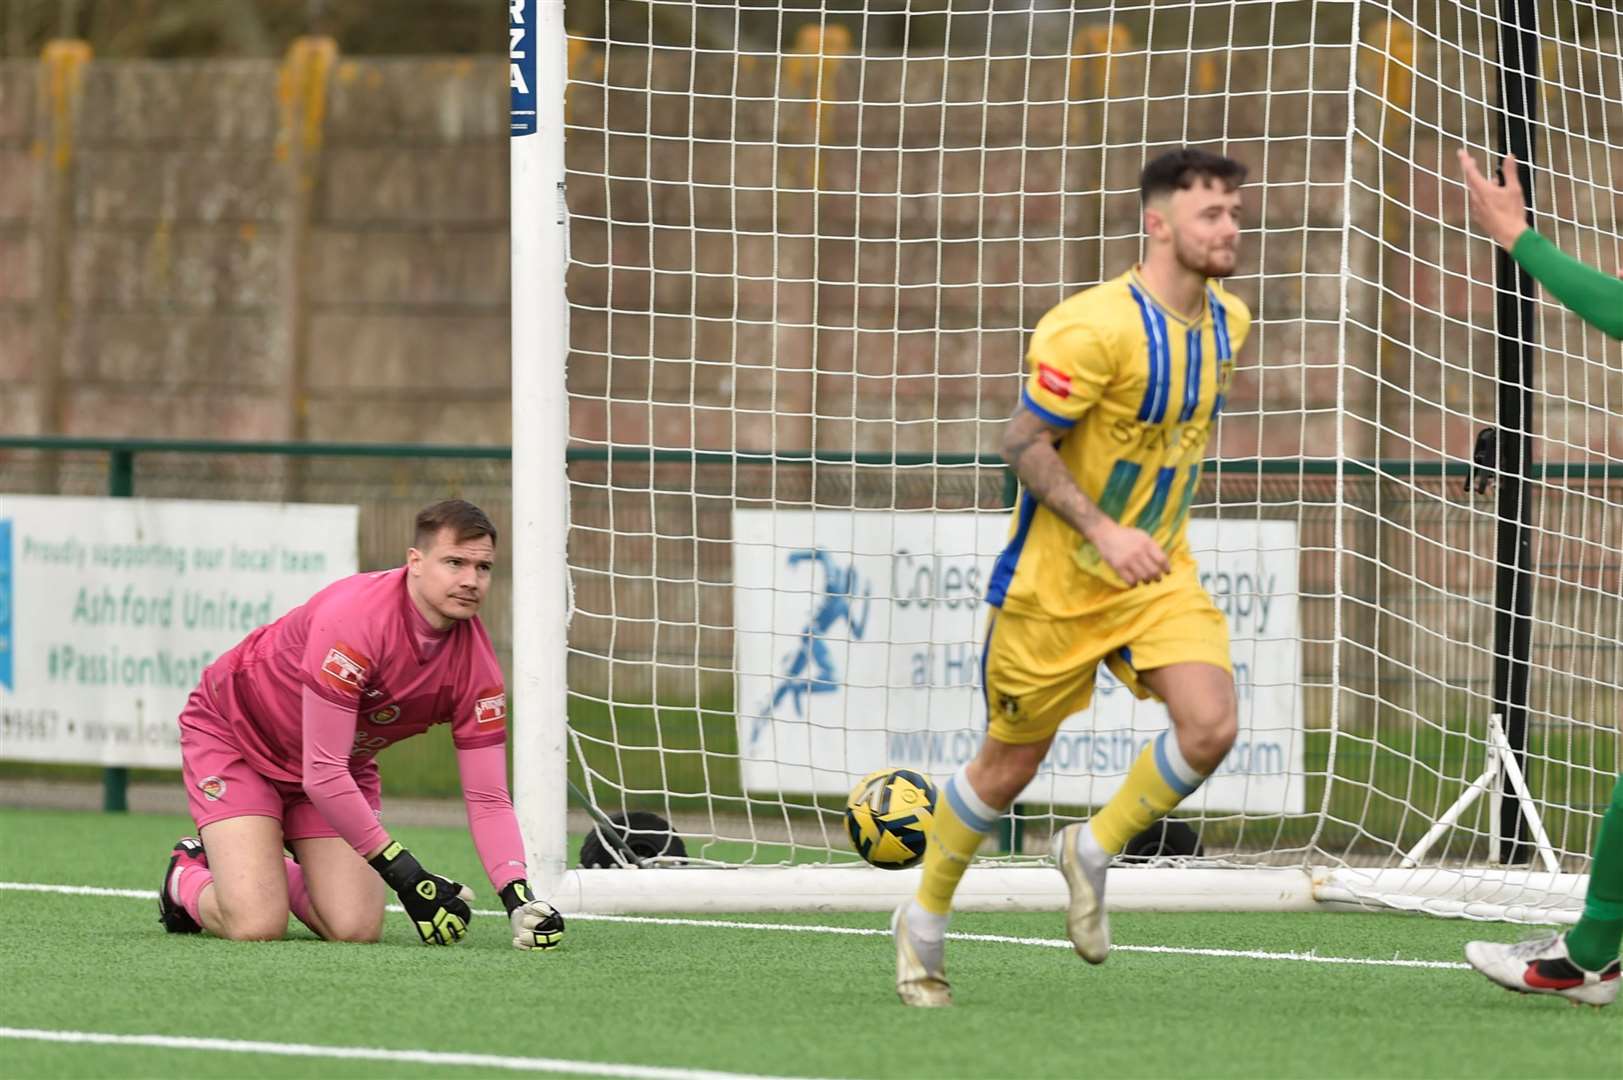 Danny Parish celebrates one of his two goals for Ashford. Picture: Ian Scammell